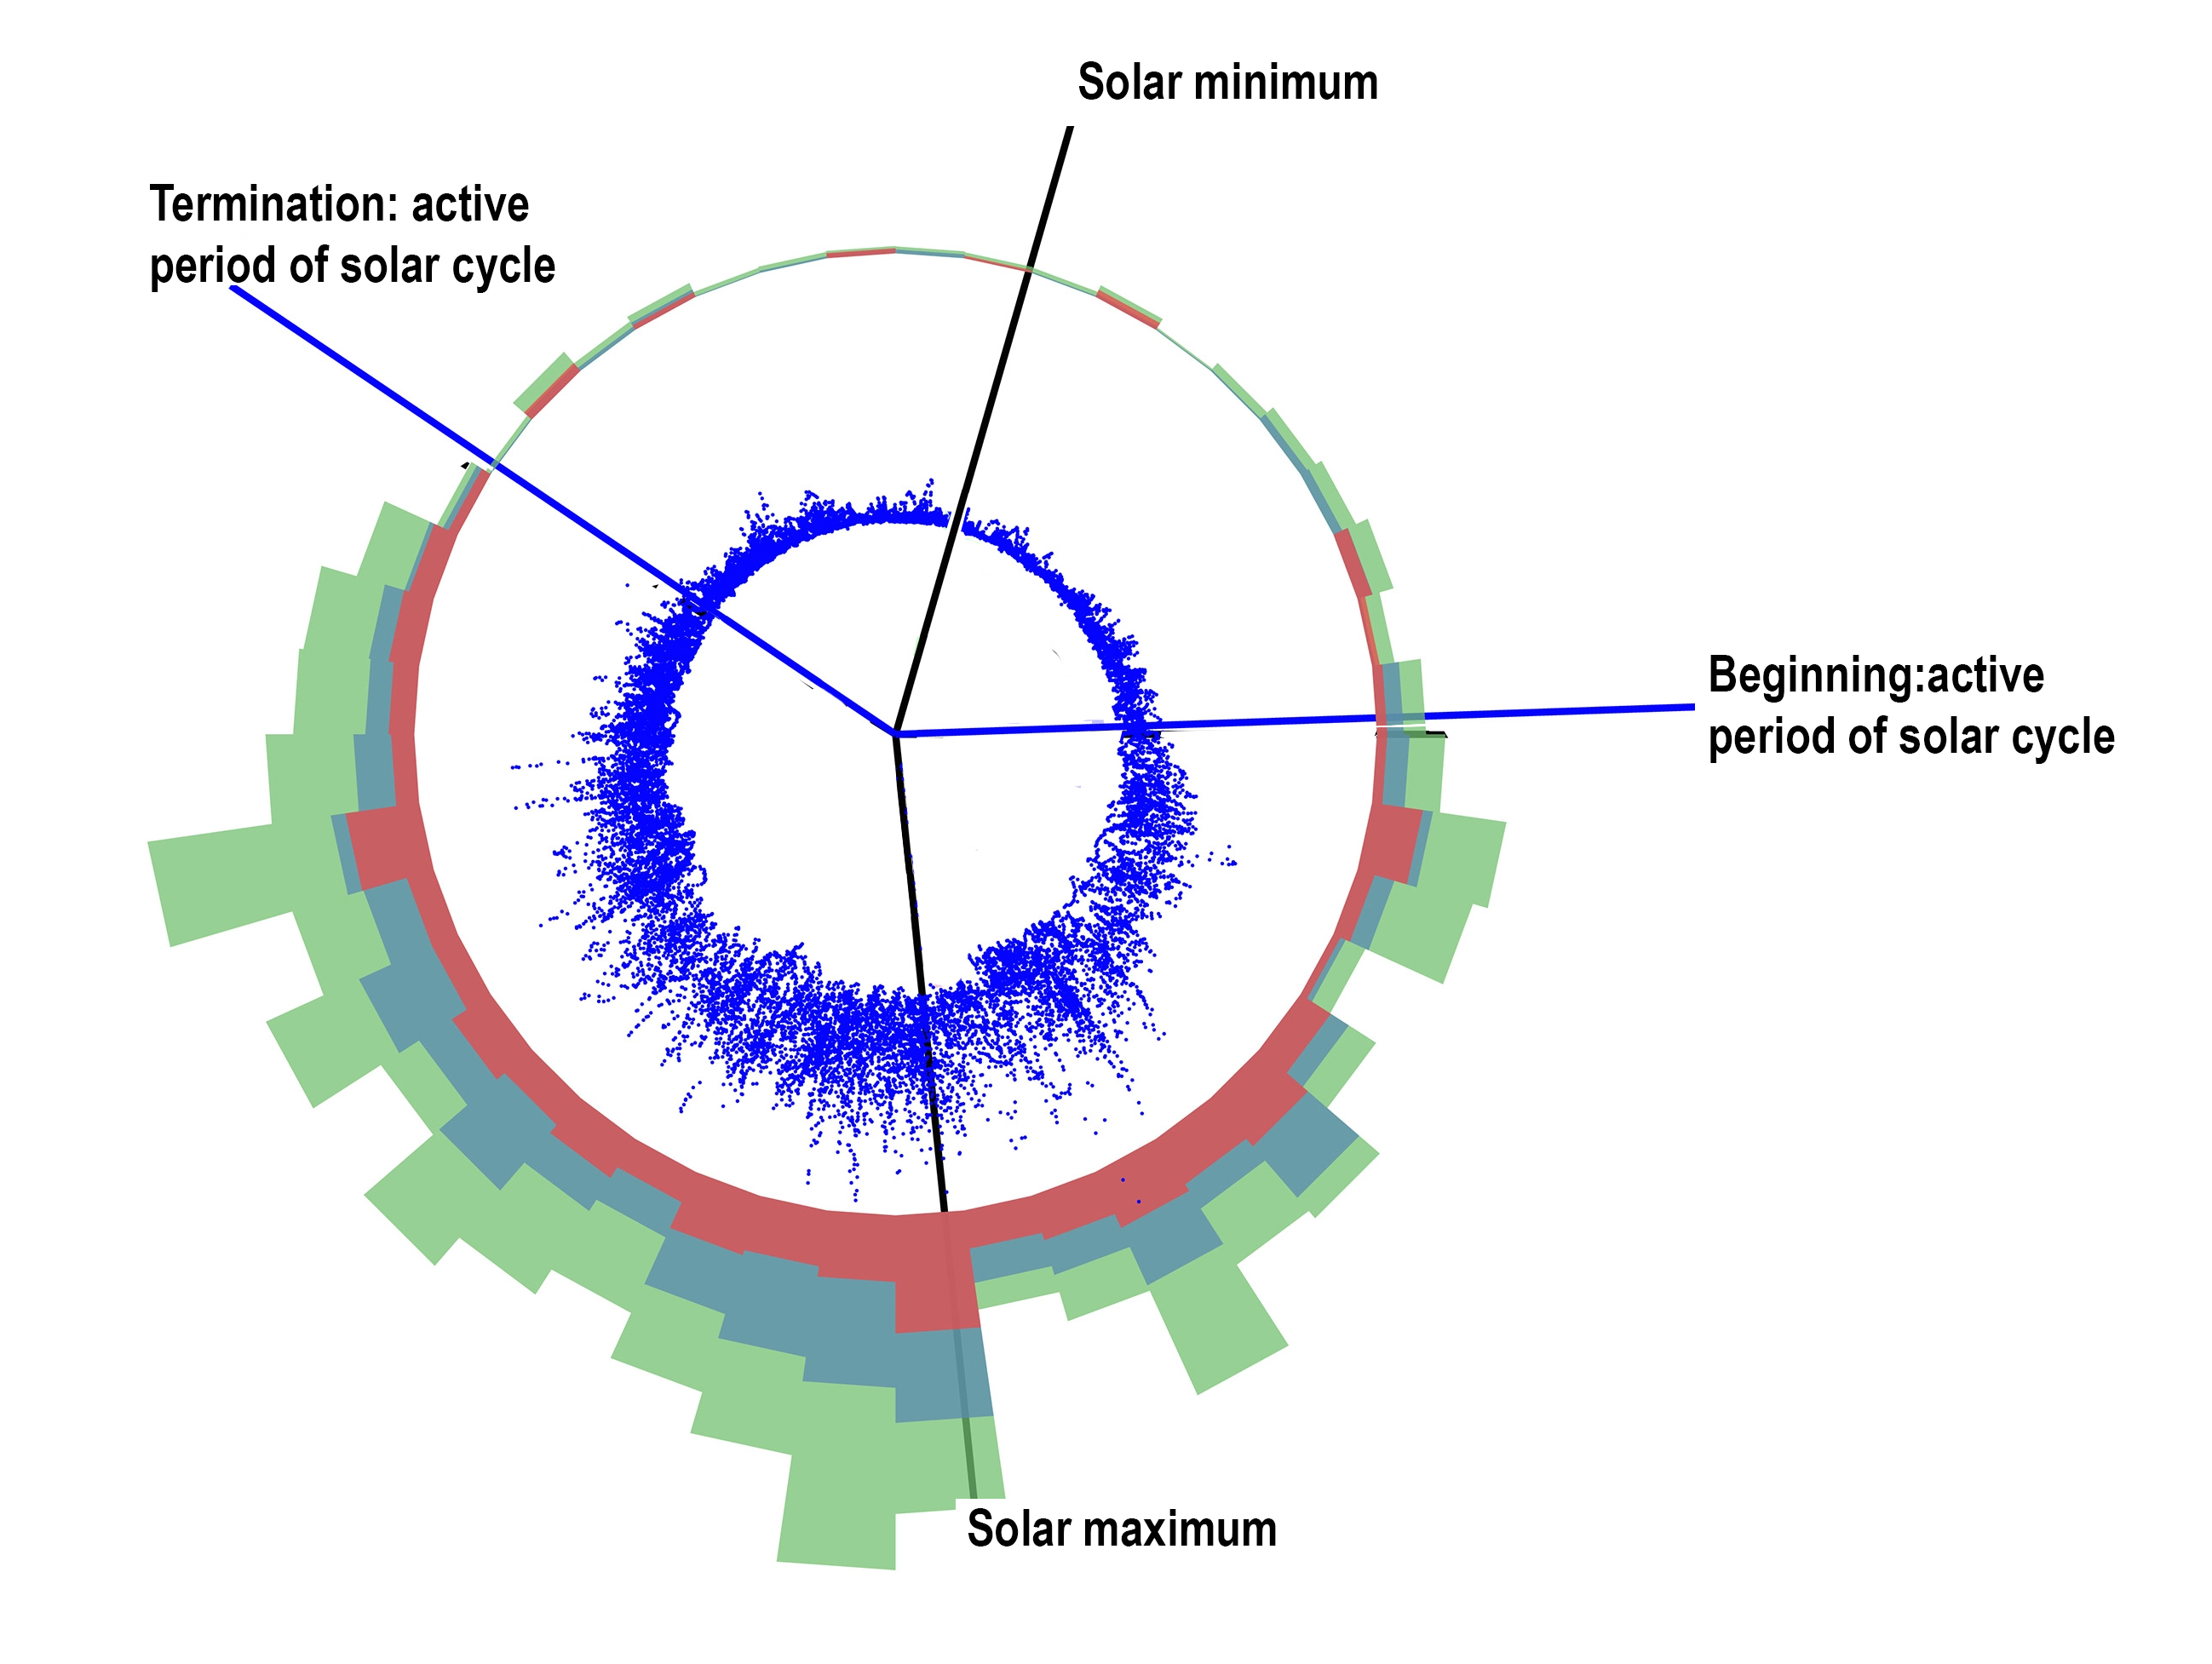 Researchers have developed the first standardized “sun clock,” which reveals a distinct pattern to the beginning and termination to solar activity (solar flares shown here by the red and green bars) and space storms (shown here in blue dots) during the last 18 solar cycles, which have occured in the last 200 years. Image credit: Robert Leamon, University of Maryland. Click image to download hi-res version.